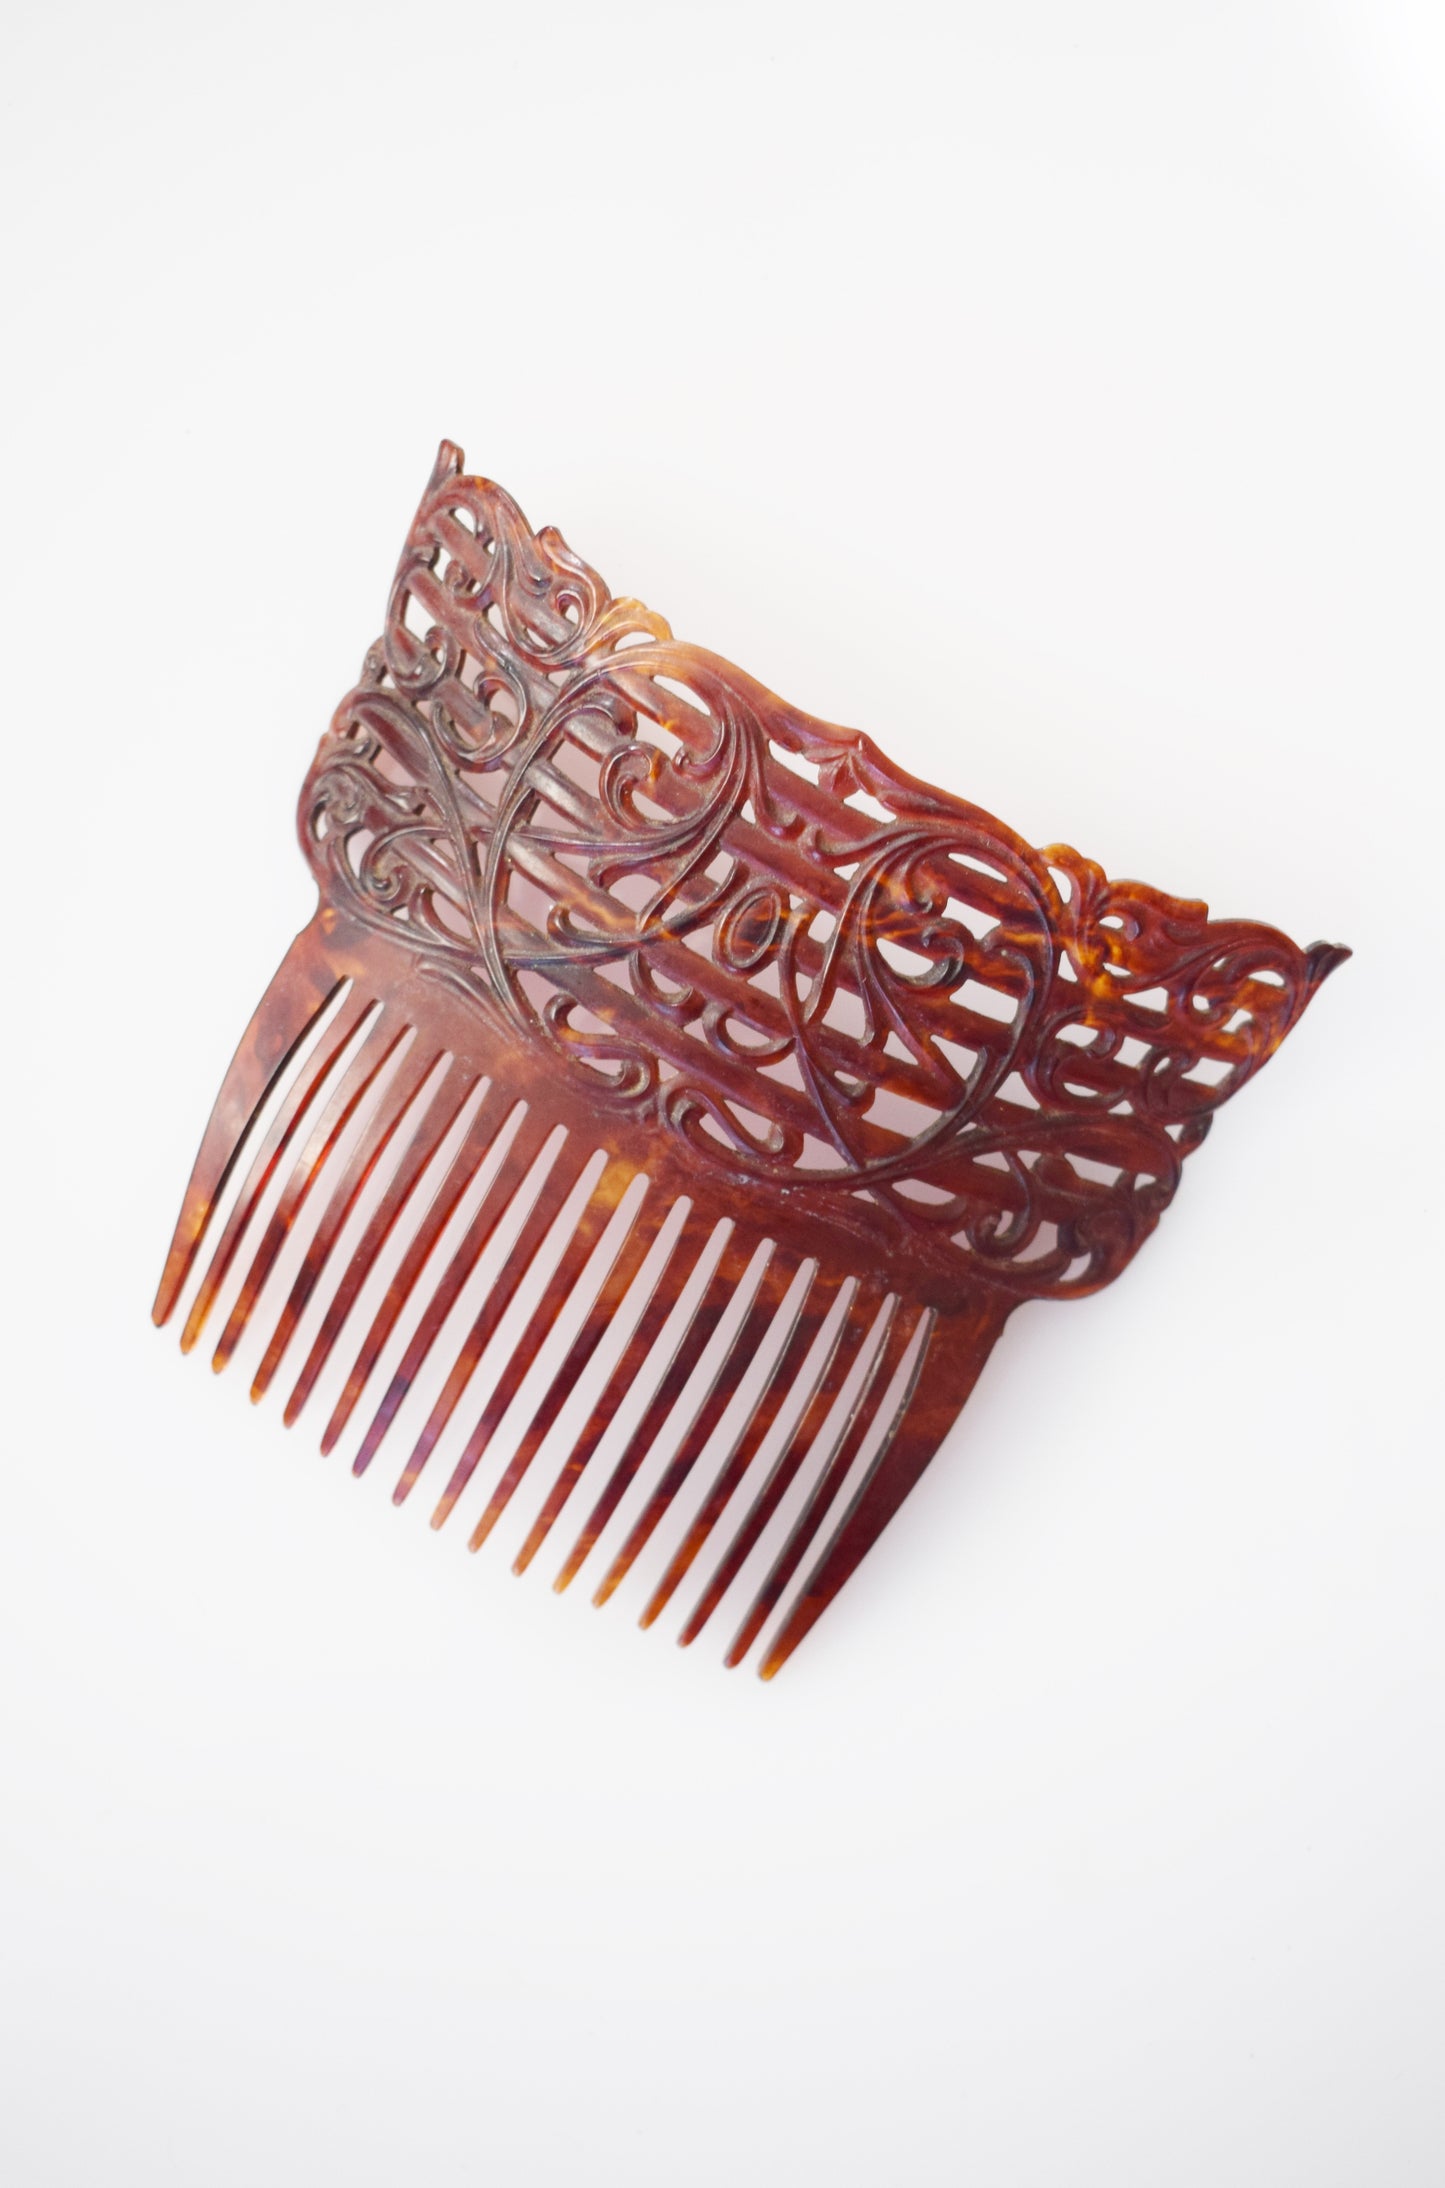 Large Antique Carved Celluloid Haircomb